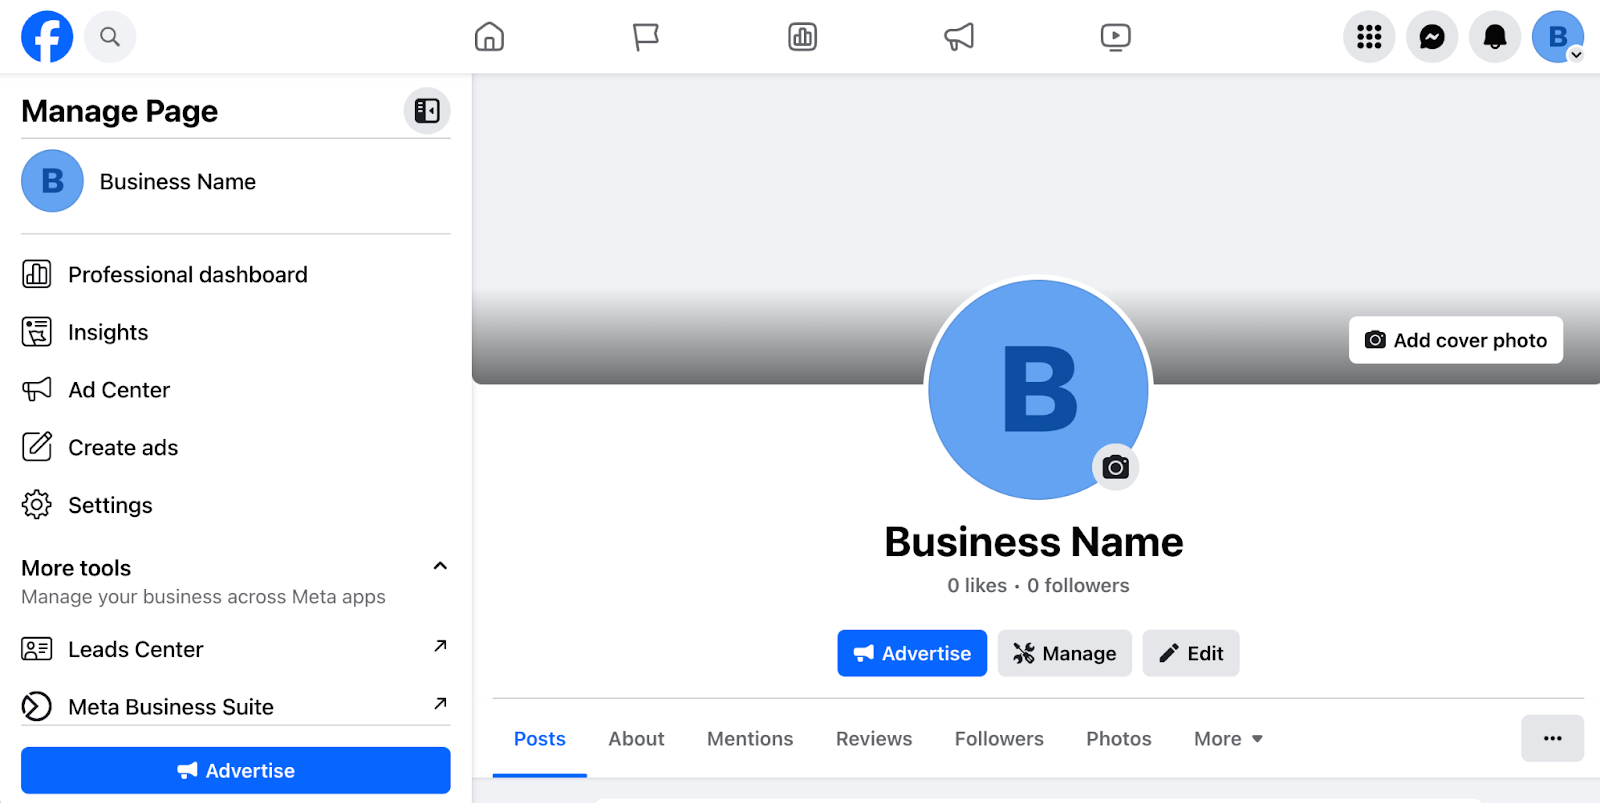 How to Claim your Restaurant’s Business Page on Facebook